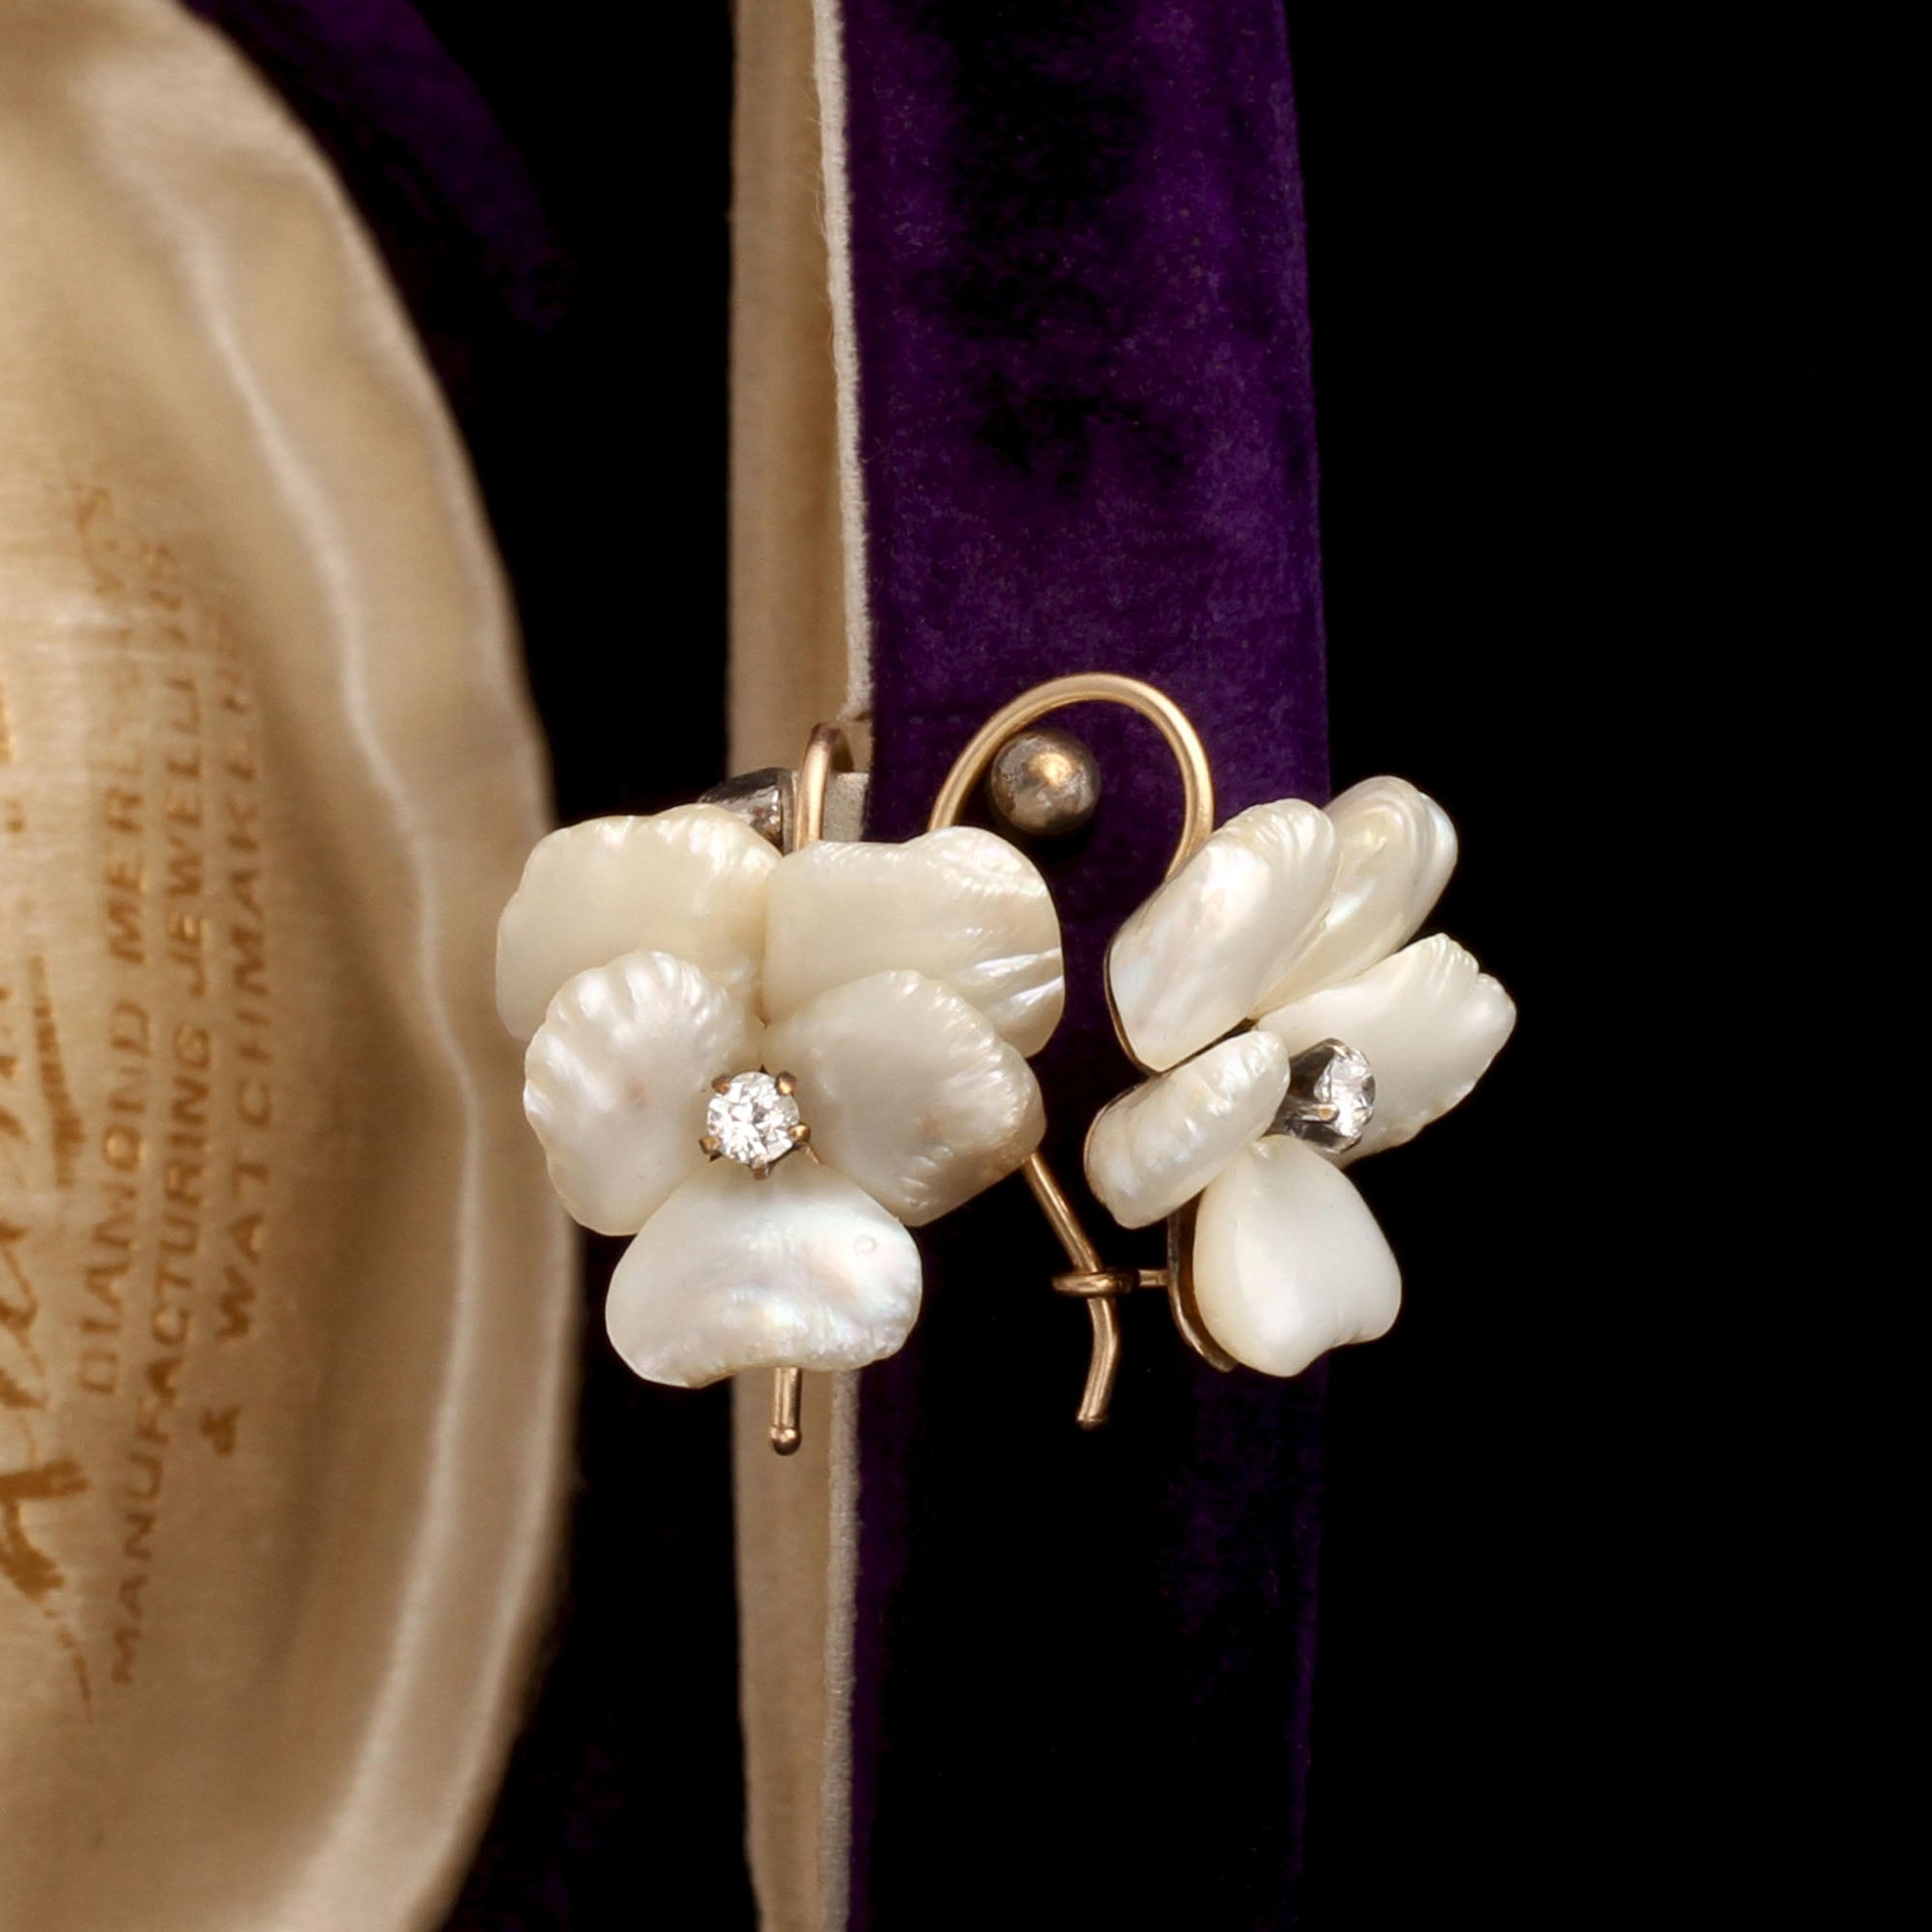 Early 20th Century "Mississippi Mud Pearl" Earrings